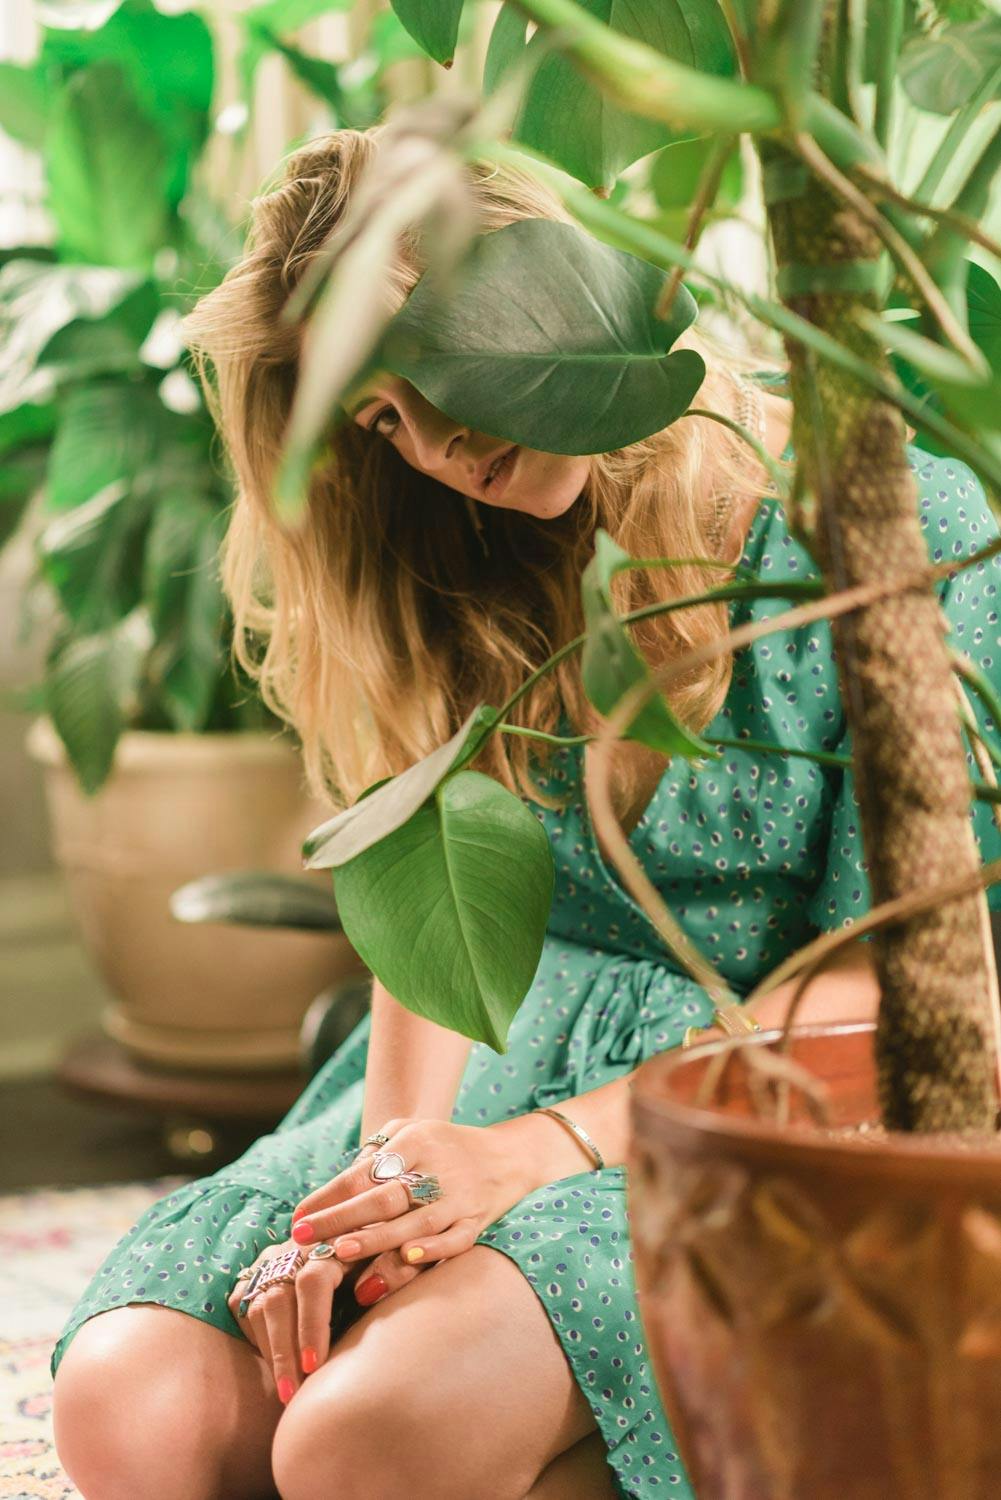 another portrait of Amanda with her plants slightly obscuring her face. she is wearing a green dress while kneeling on the floor.